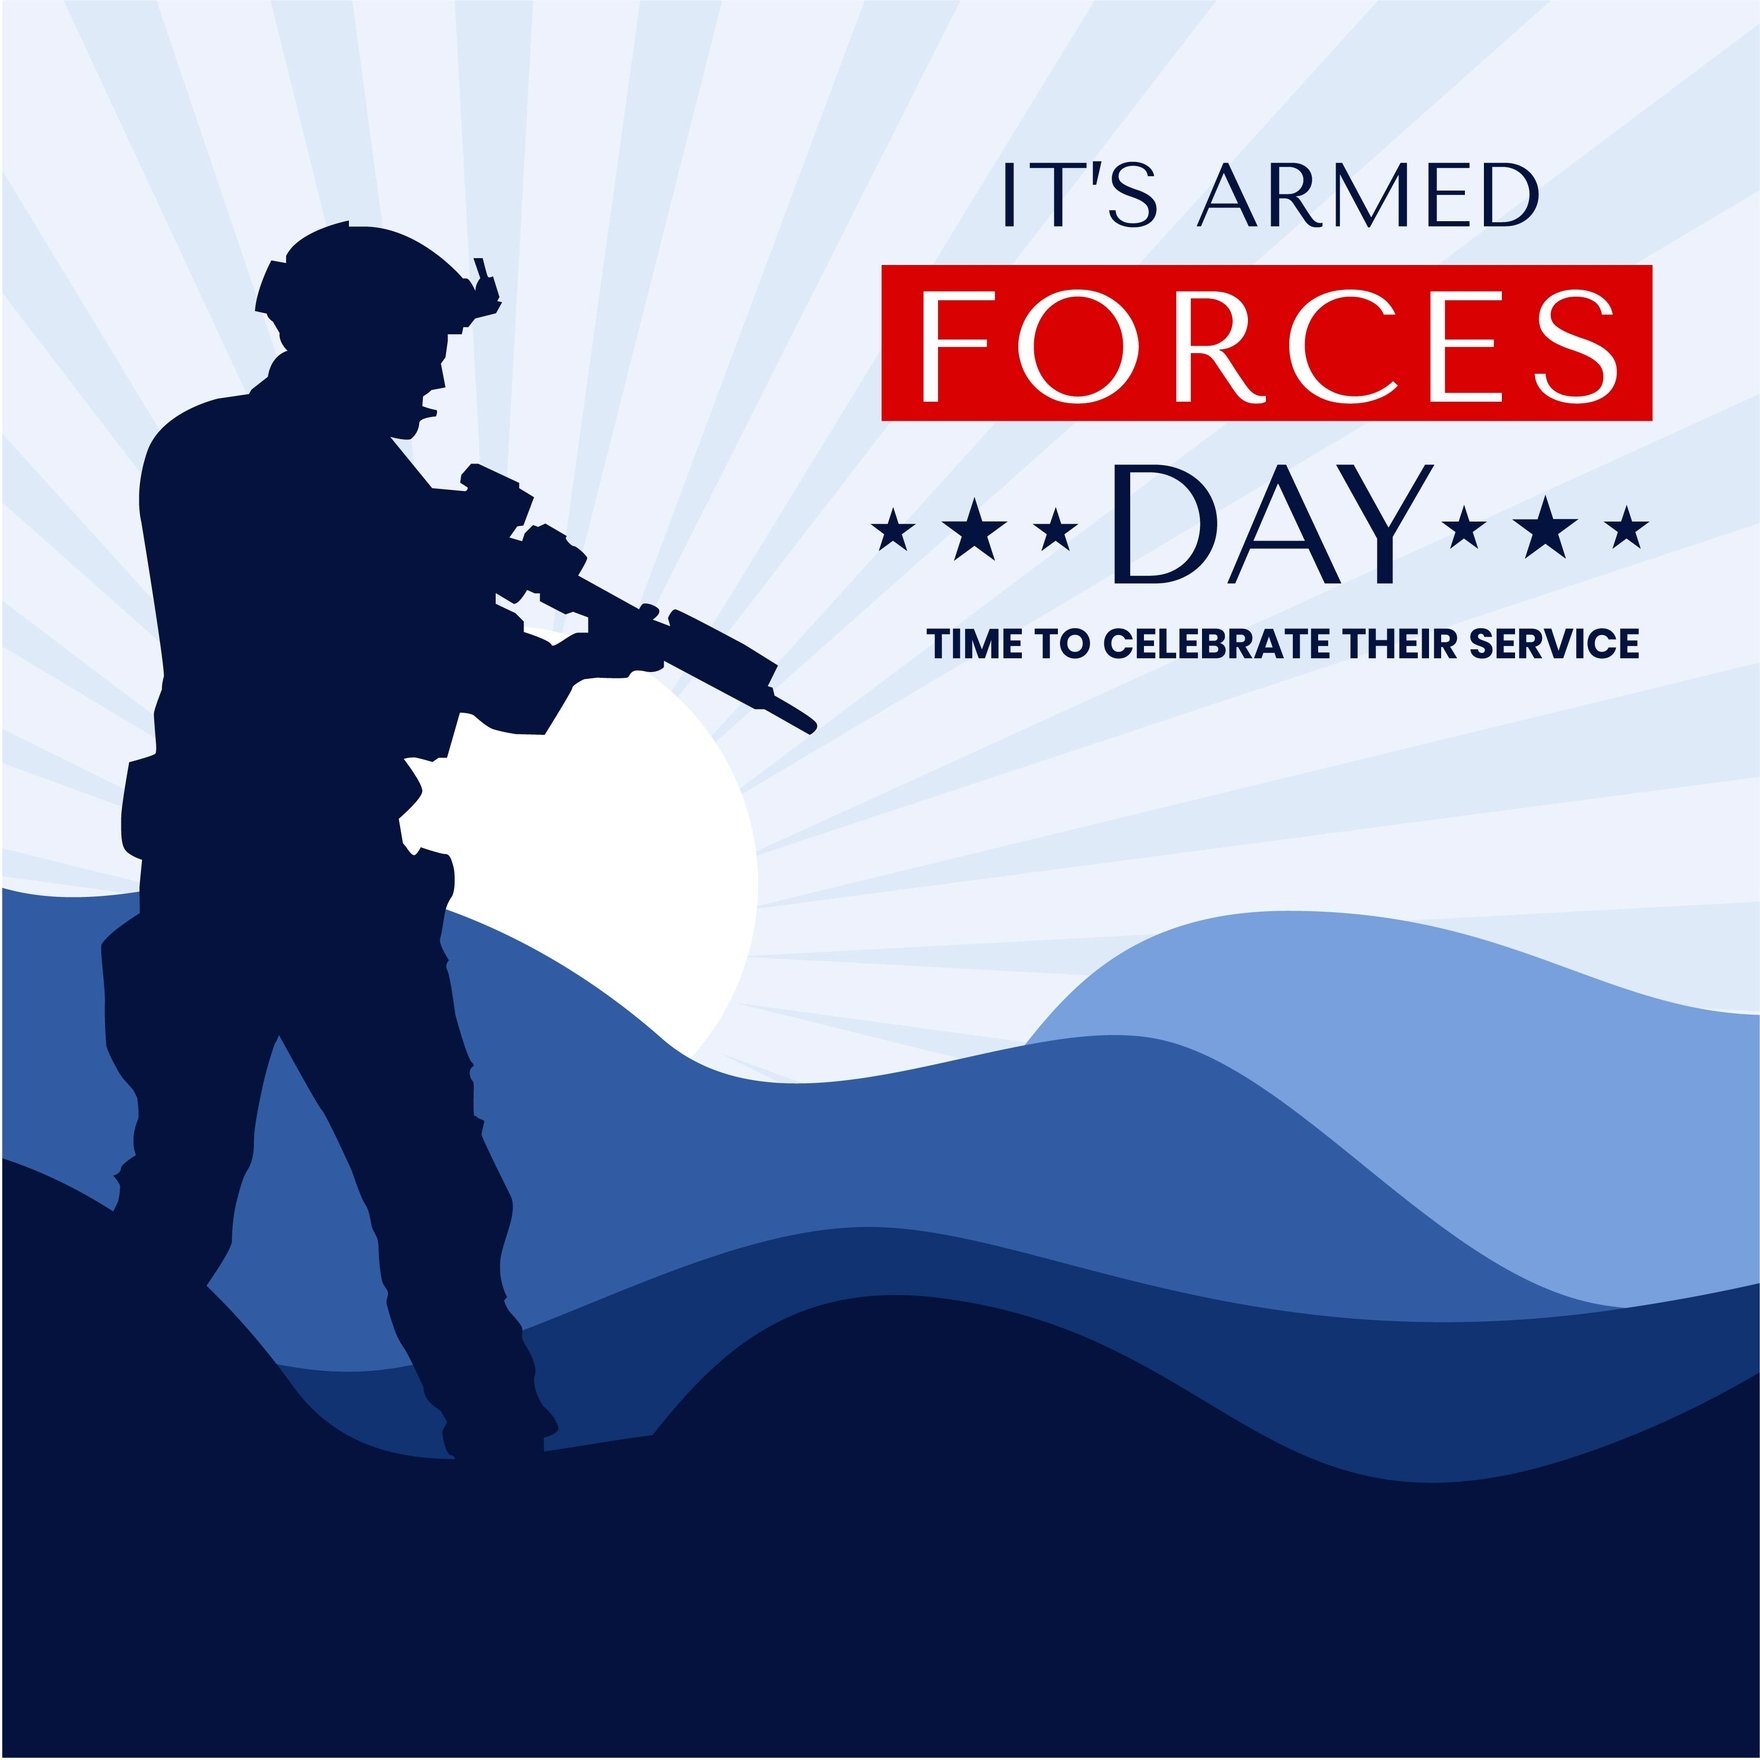 Free Armed Forces Day Whatsapp Post in Illustrator, PSD, EPS, SVG, PNG, JPEG